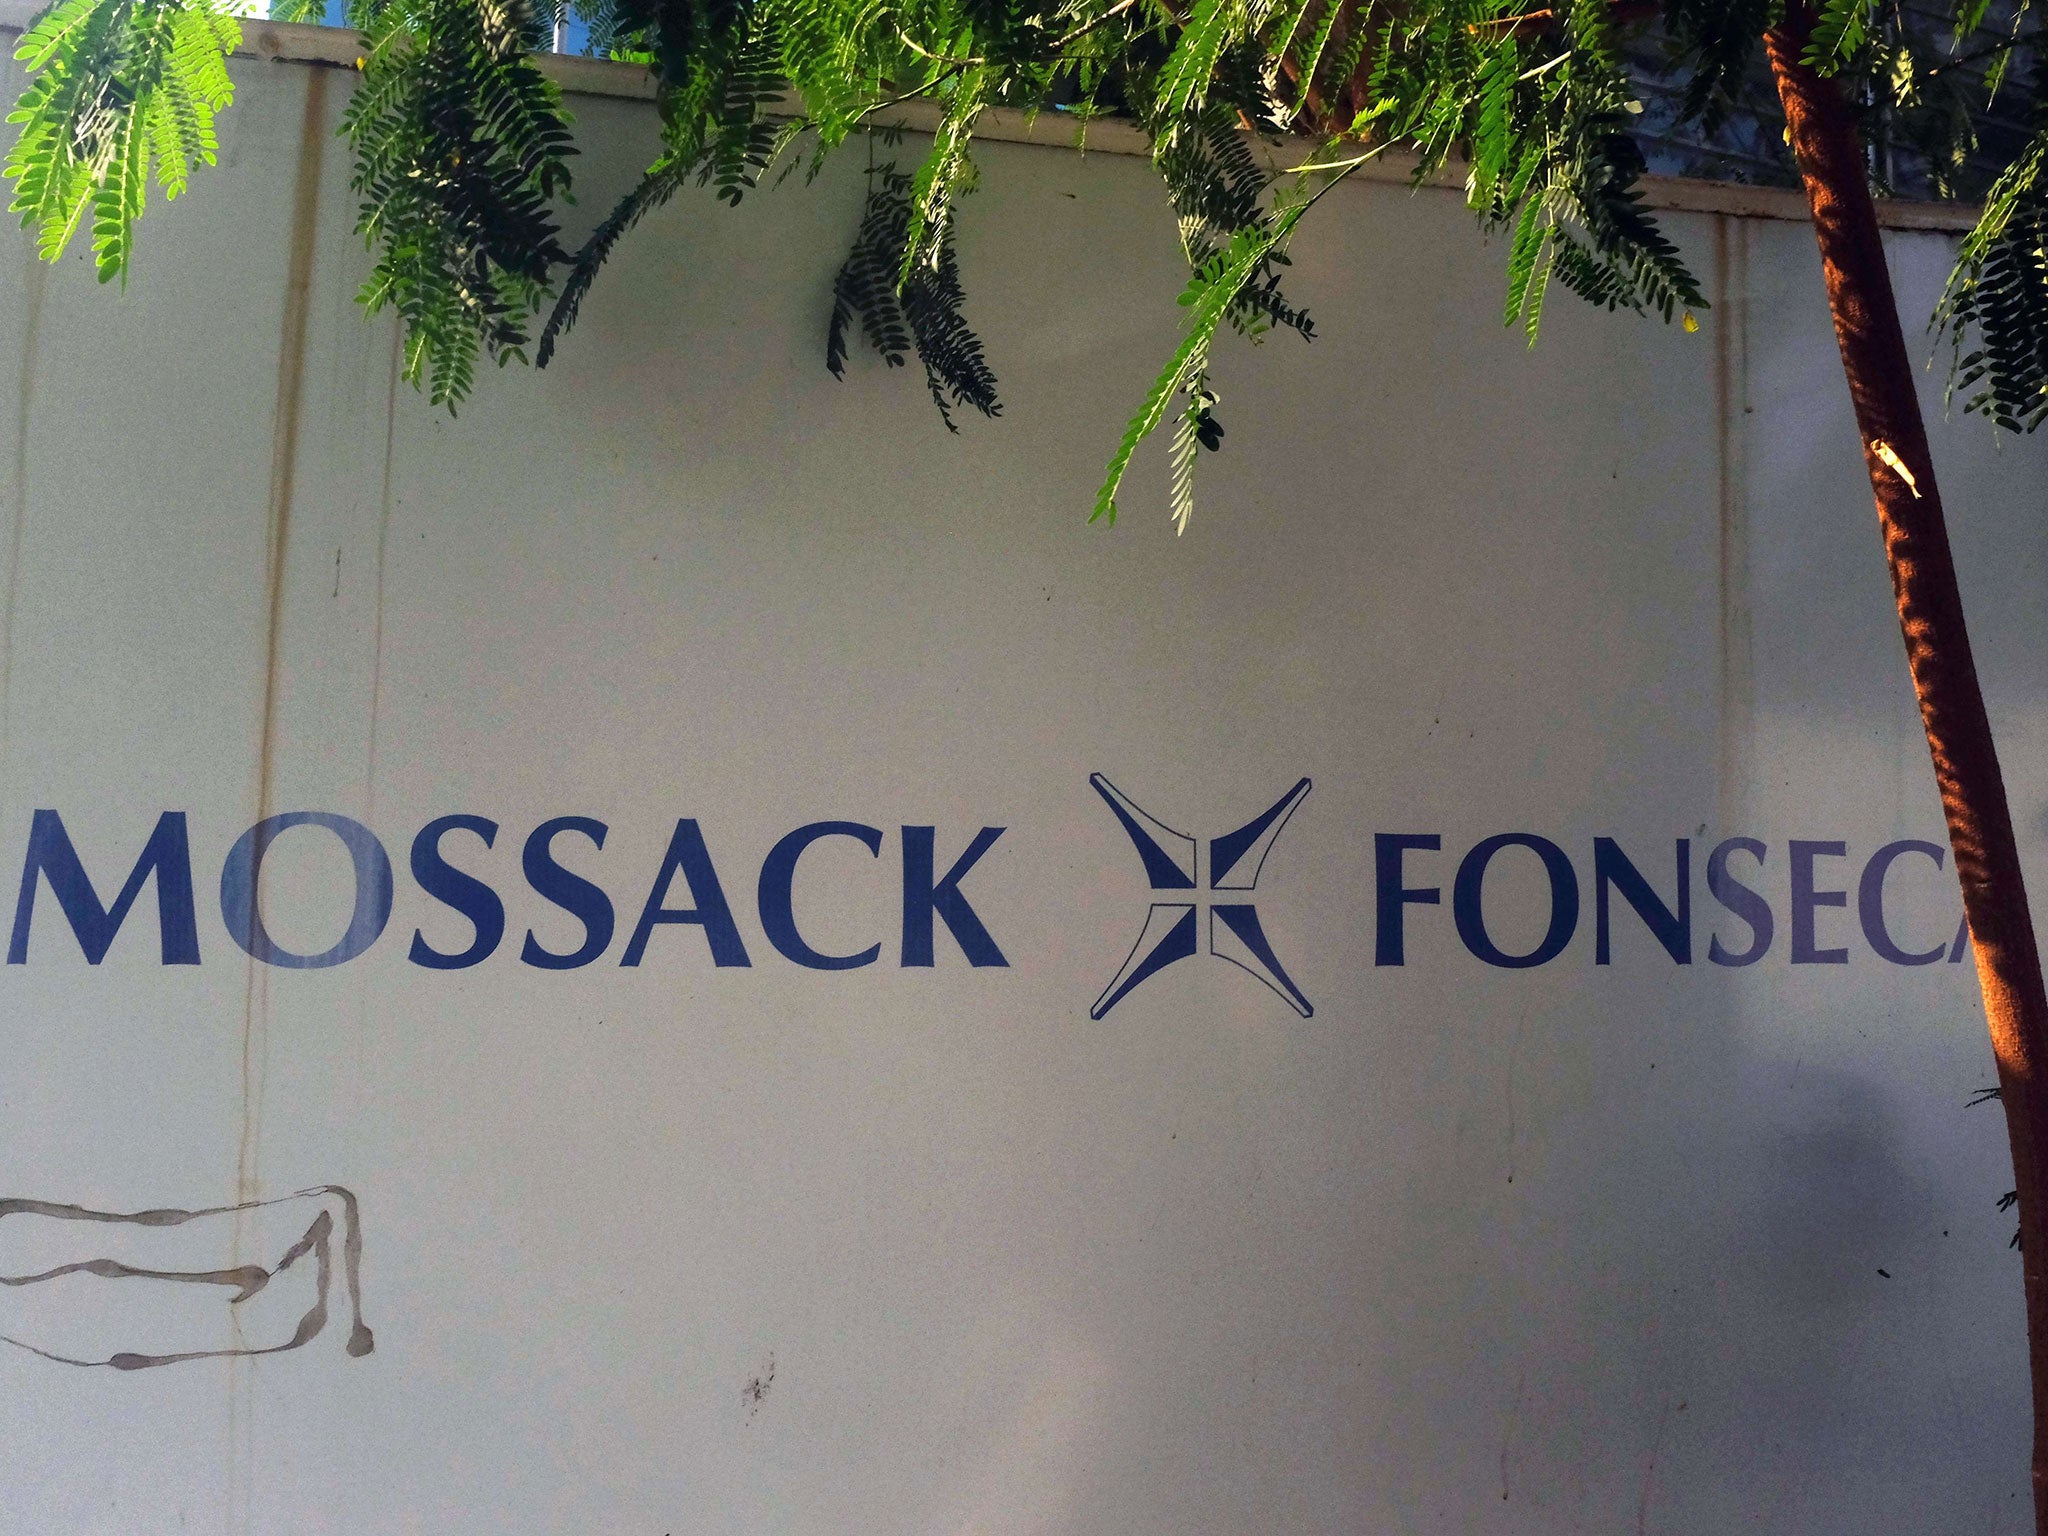 The files have been leaked from law firm Mossack Fonseca in Panama